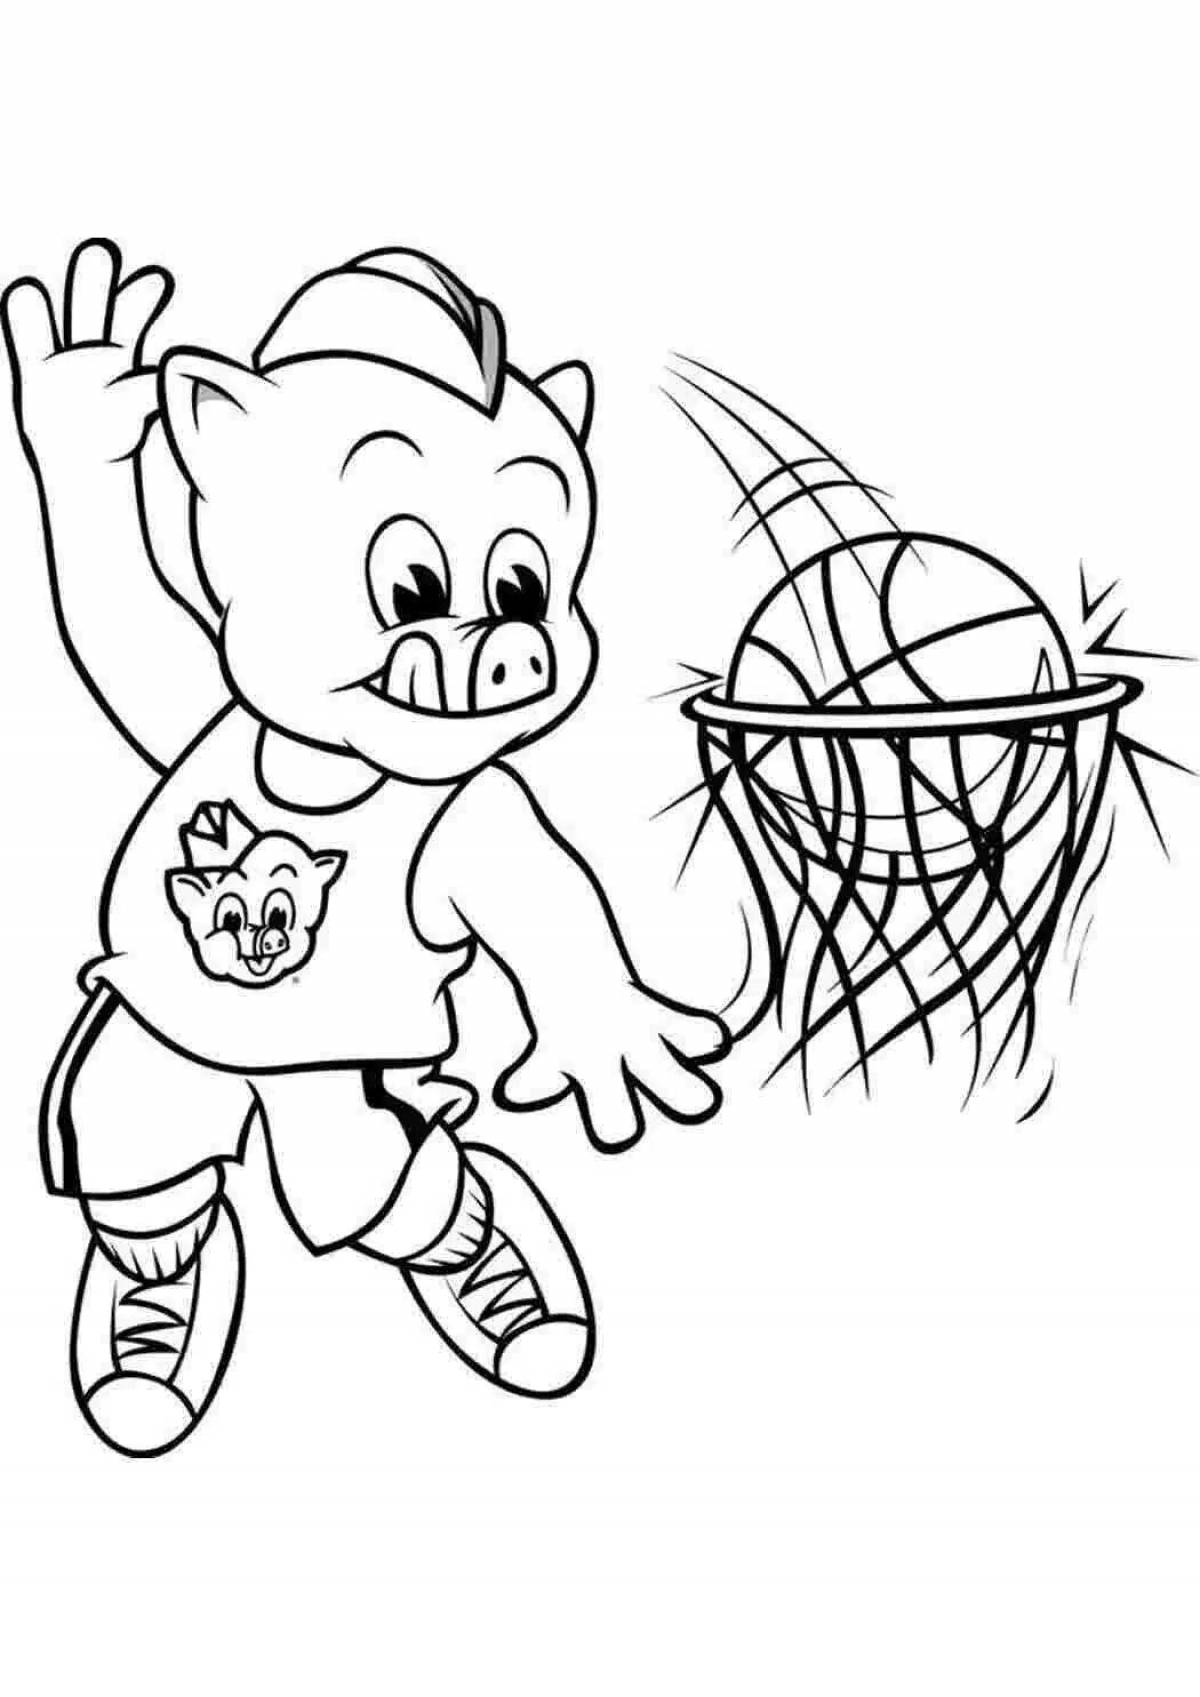 Exciting sports coloring pages for kids